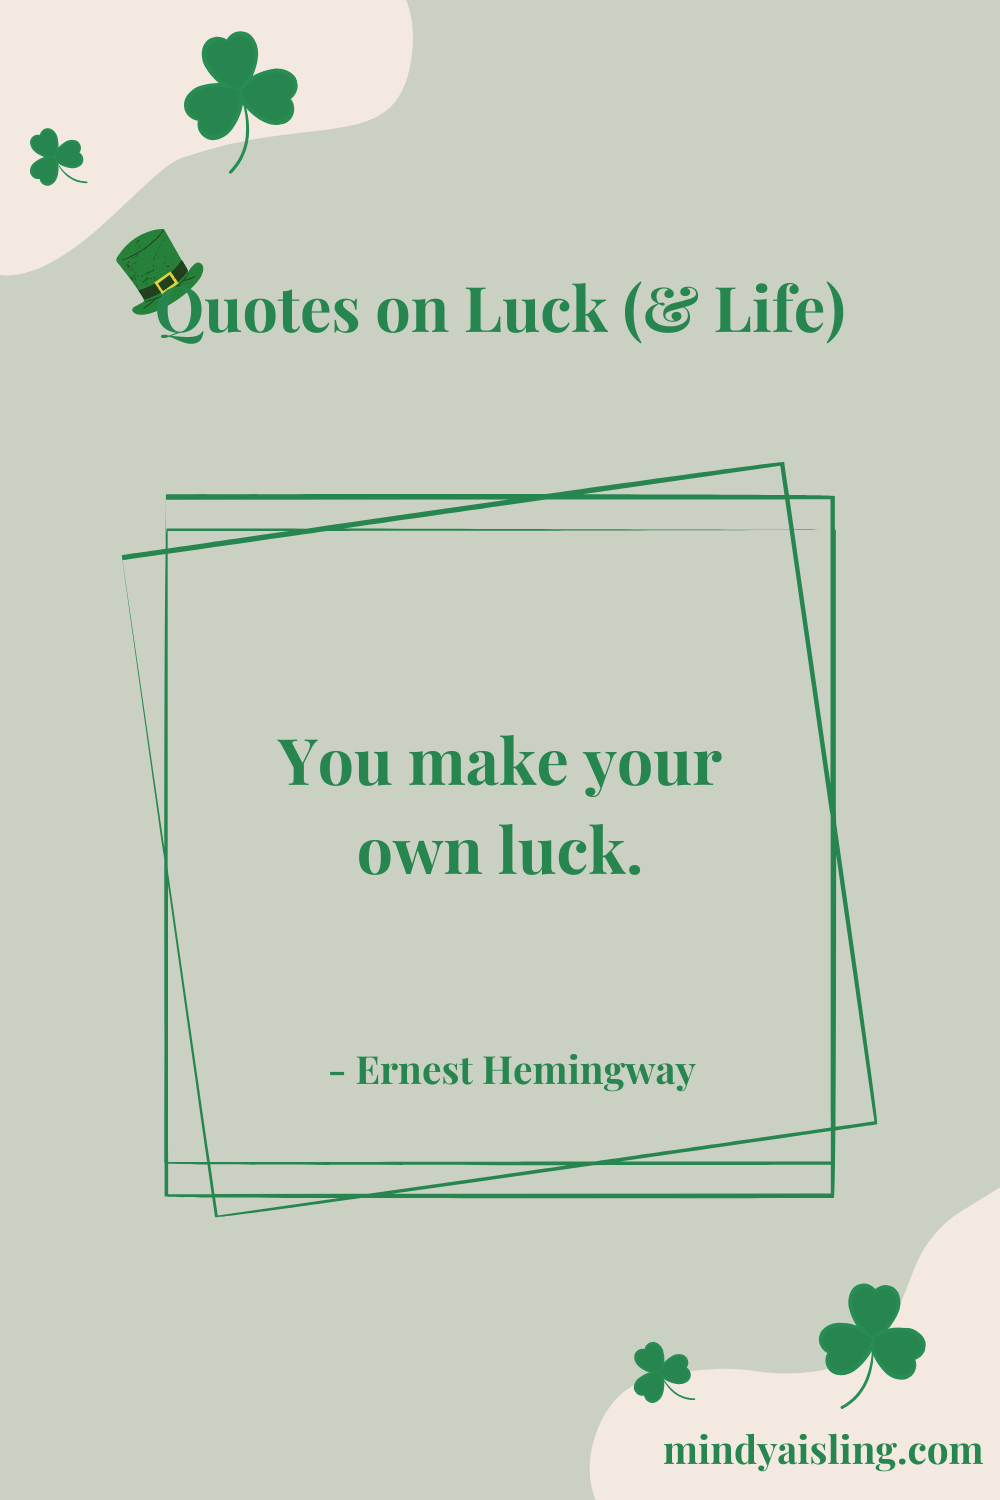 Quotes on Luck and Life